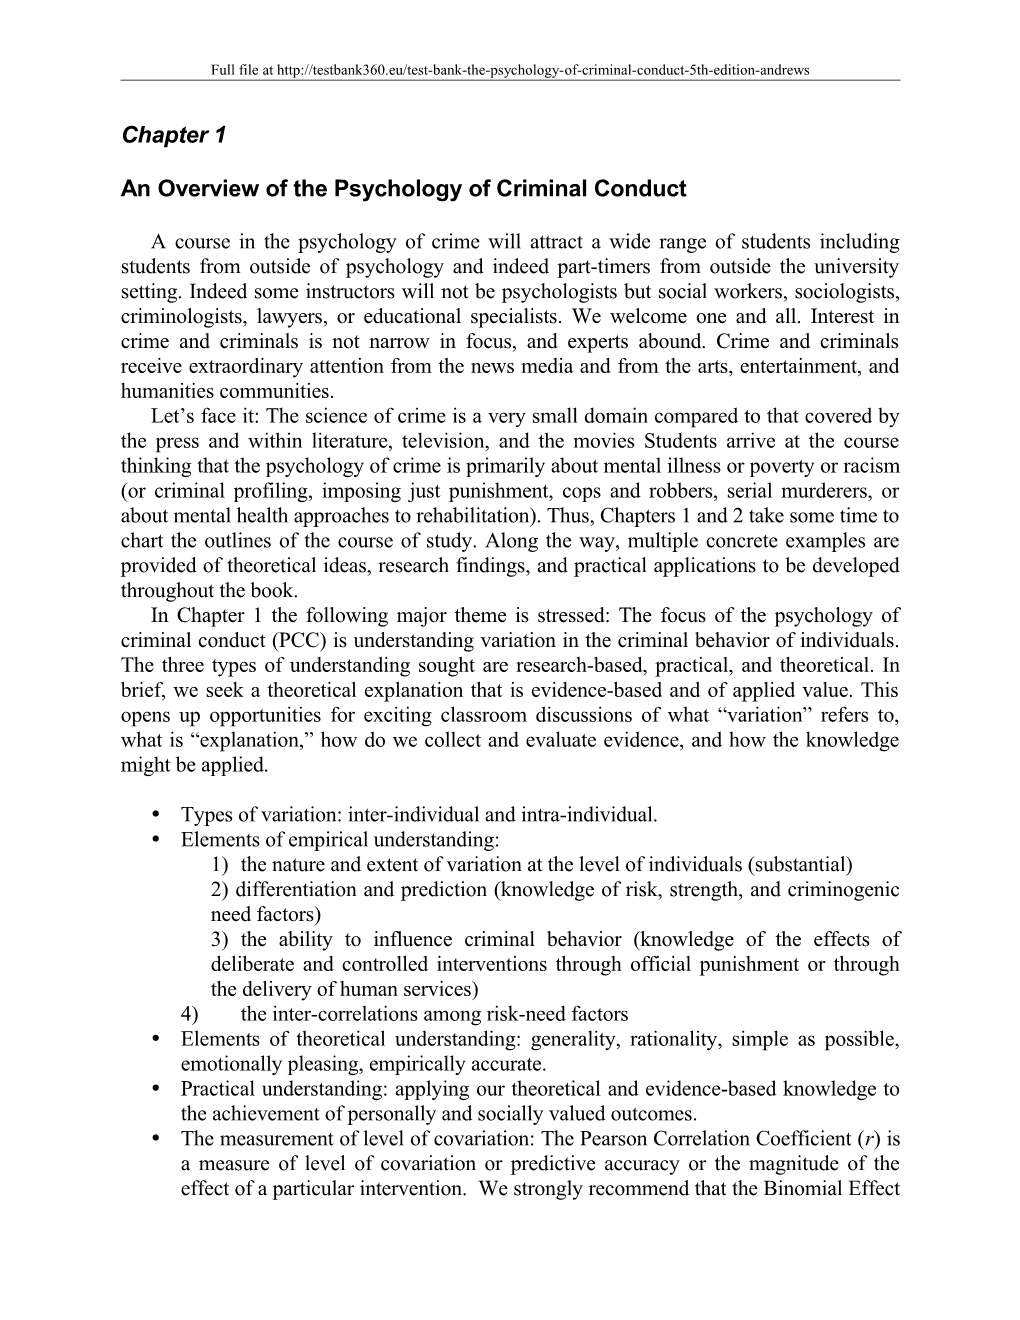 An Overview of the Psychology of Criminal Conduct